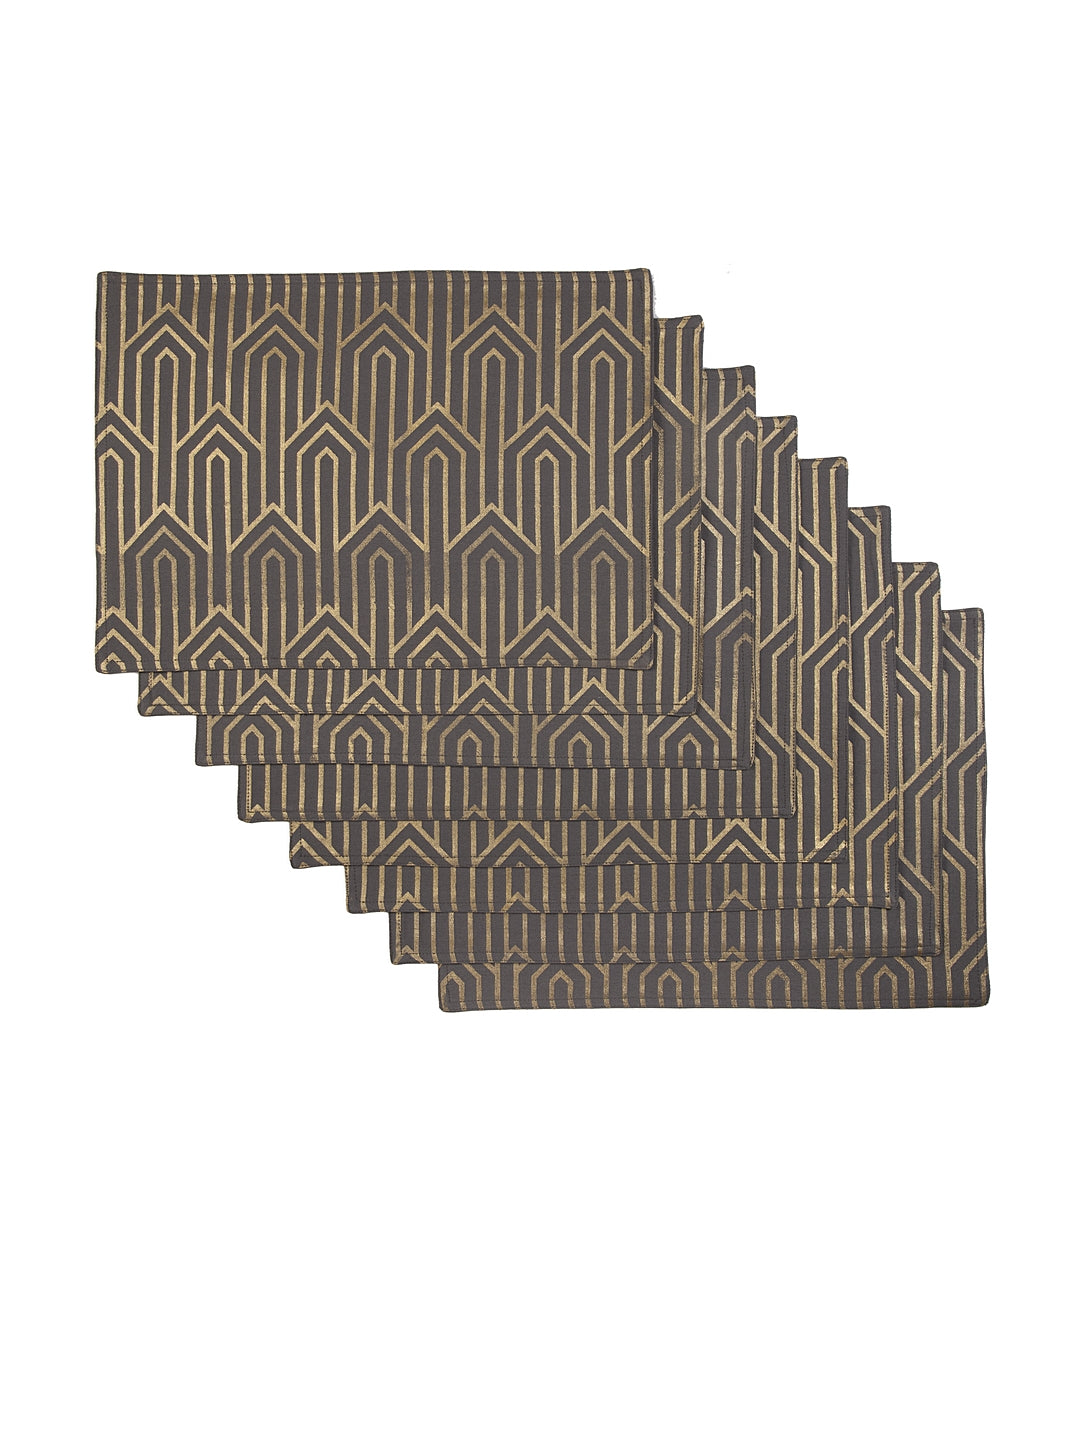 Set of 8 Contemporary Braided Foil Printed Placemats